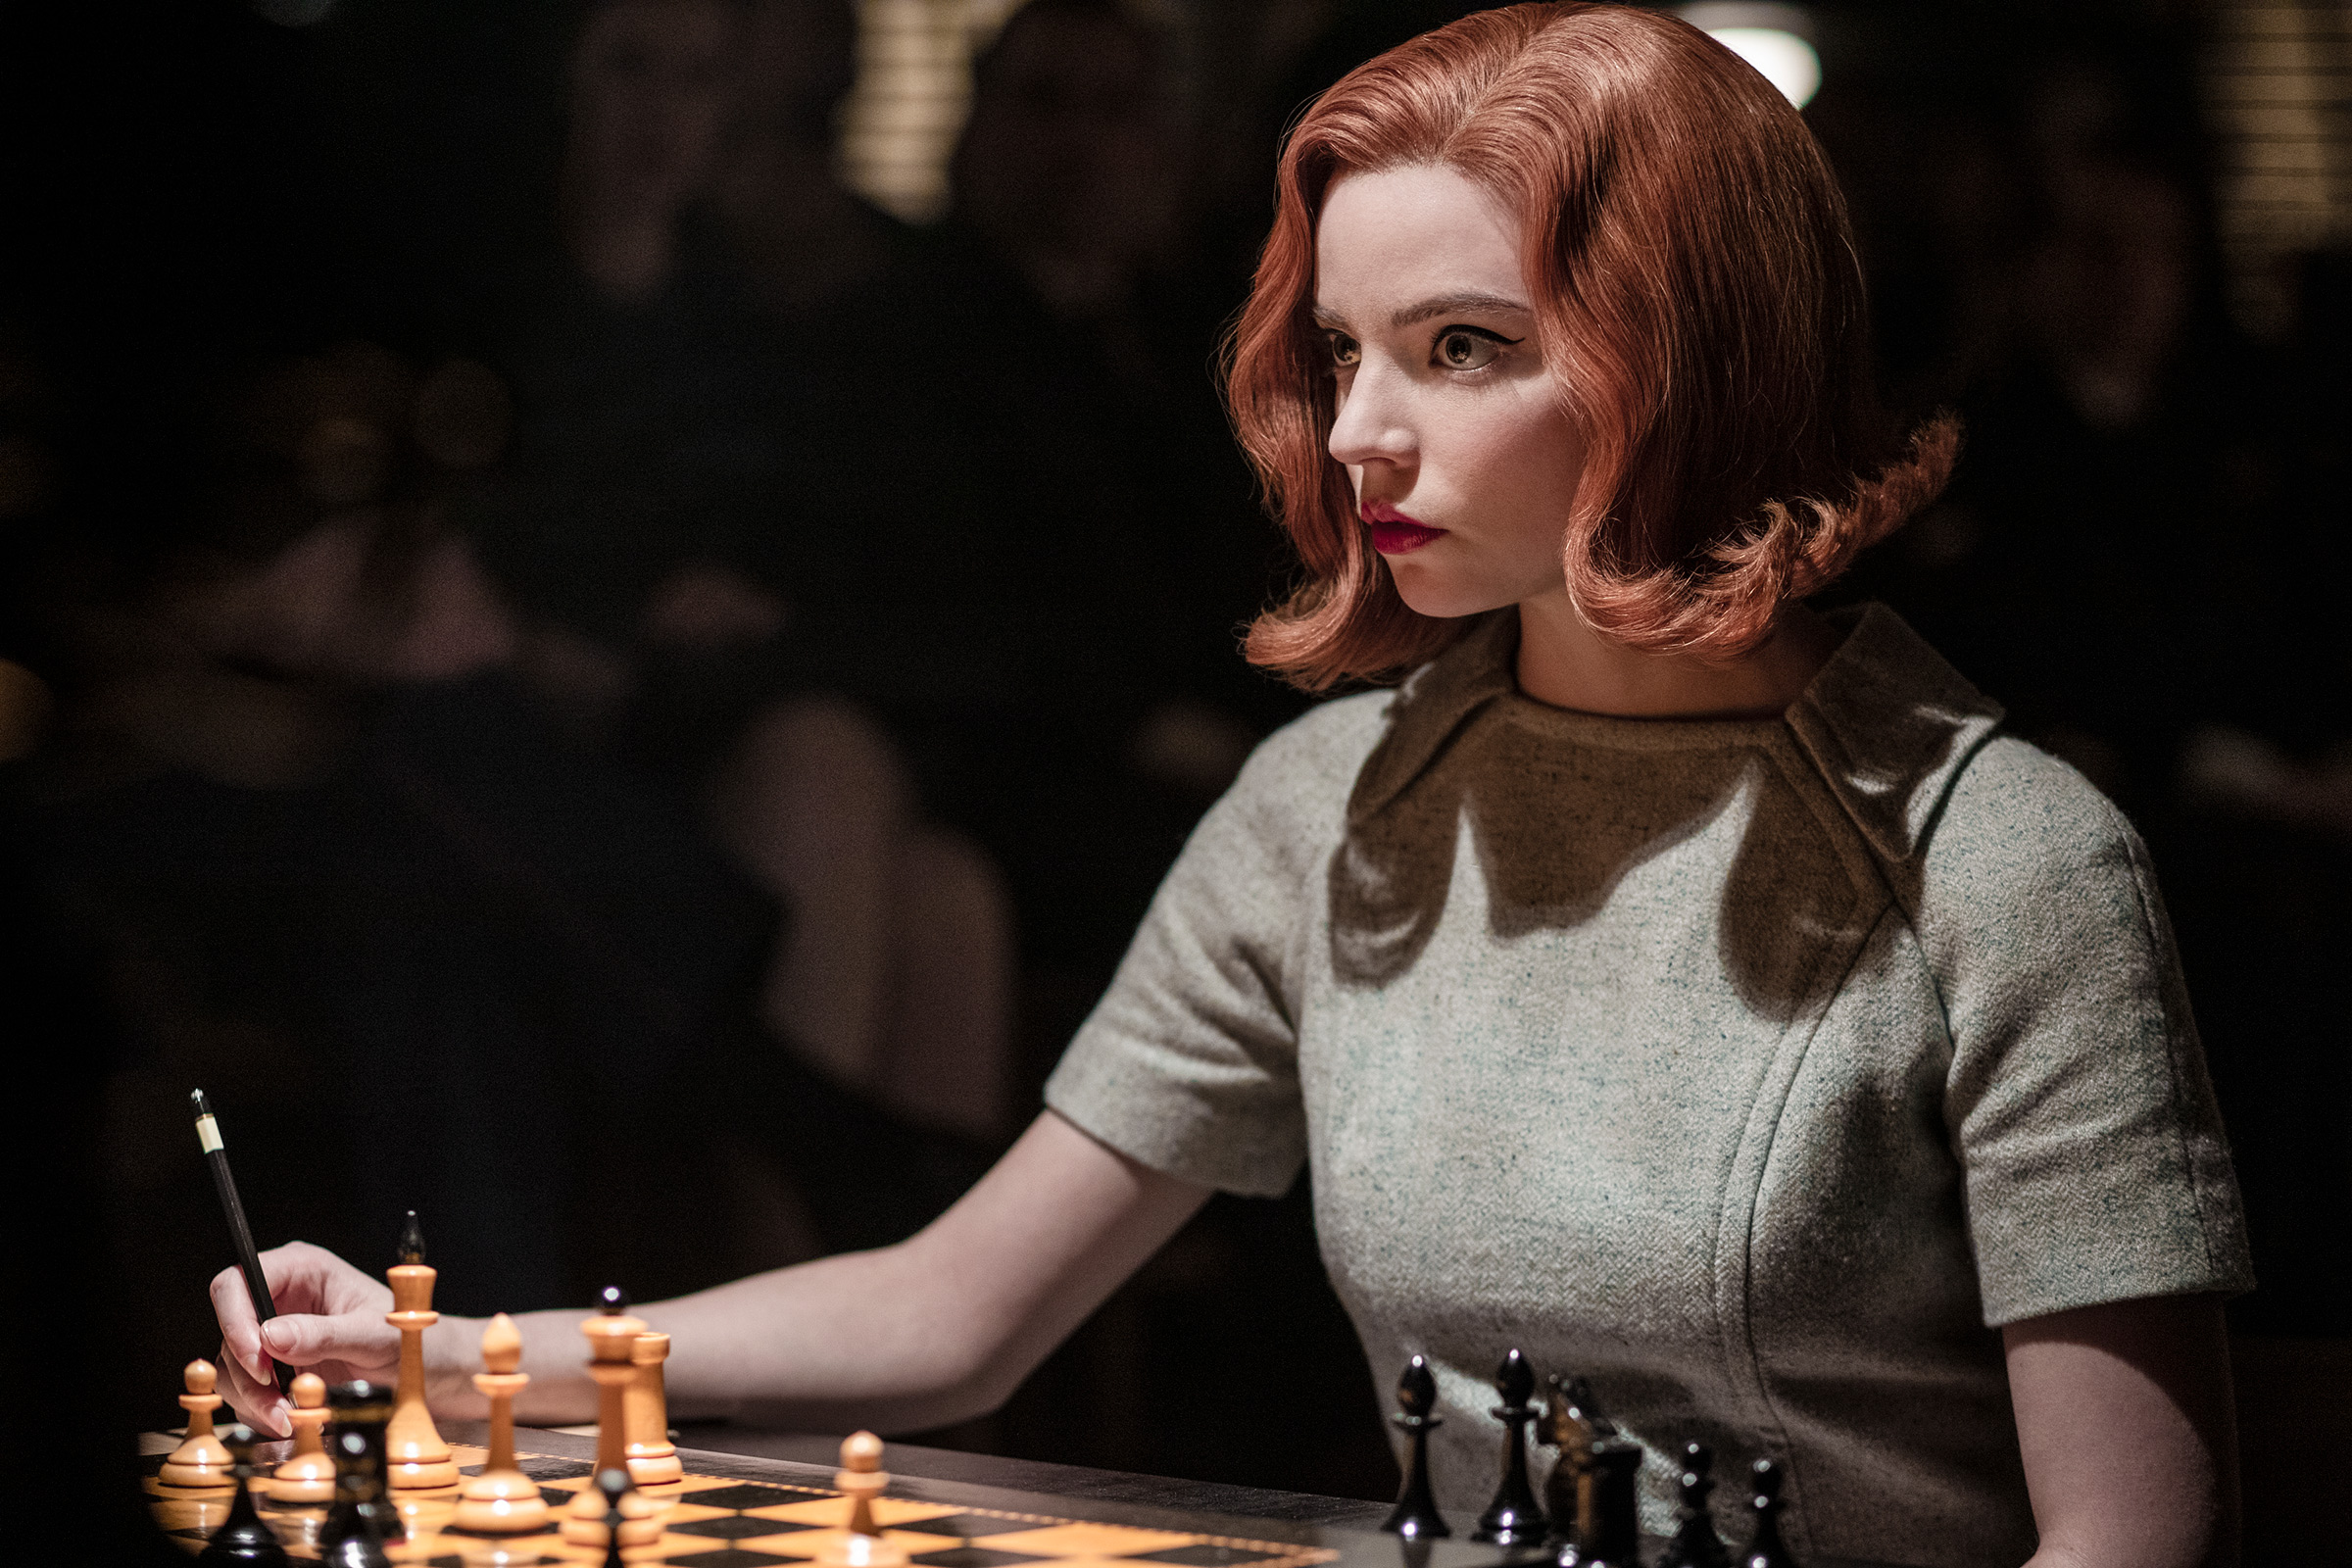 A still from "The Queen's Gambit," which debuted on Netflix in 2020. (Phil Bray/Netflix)